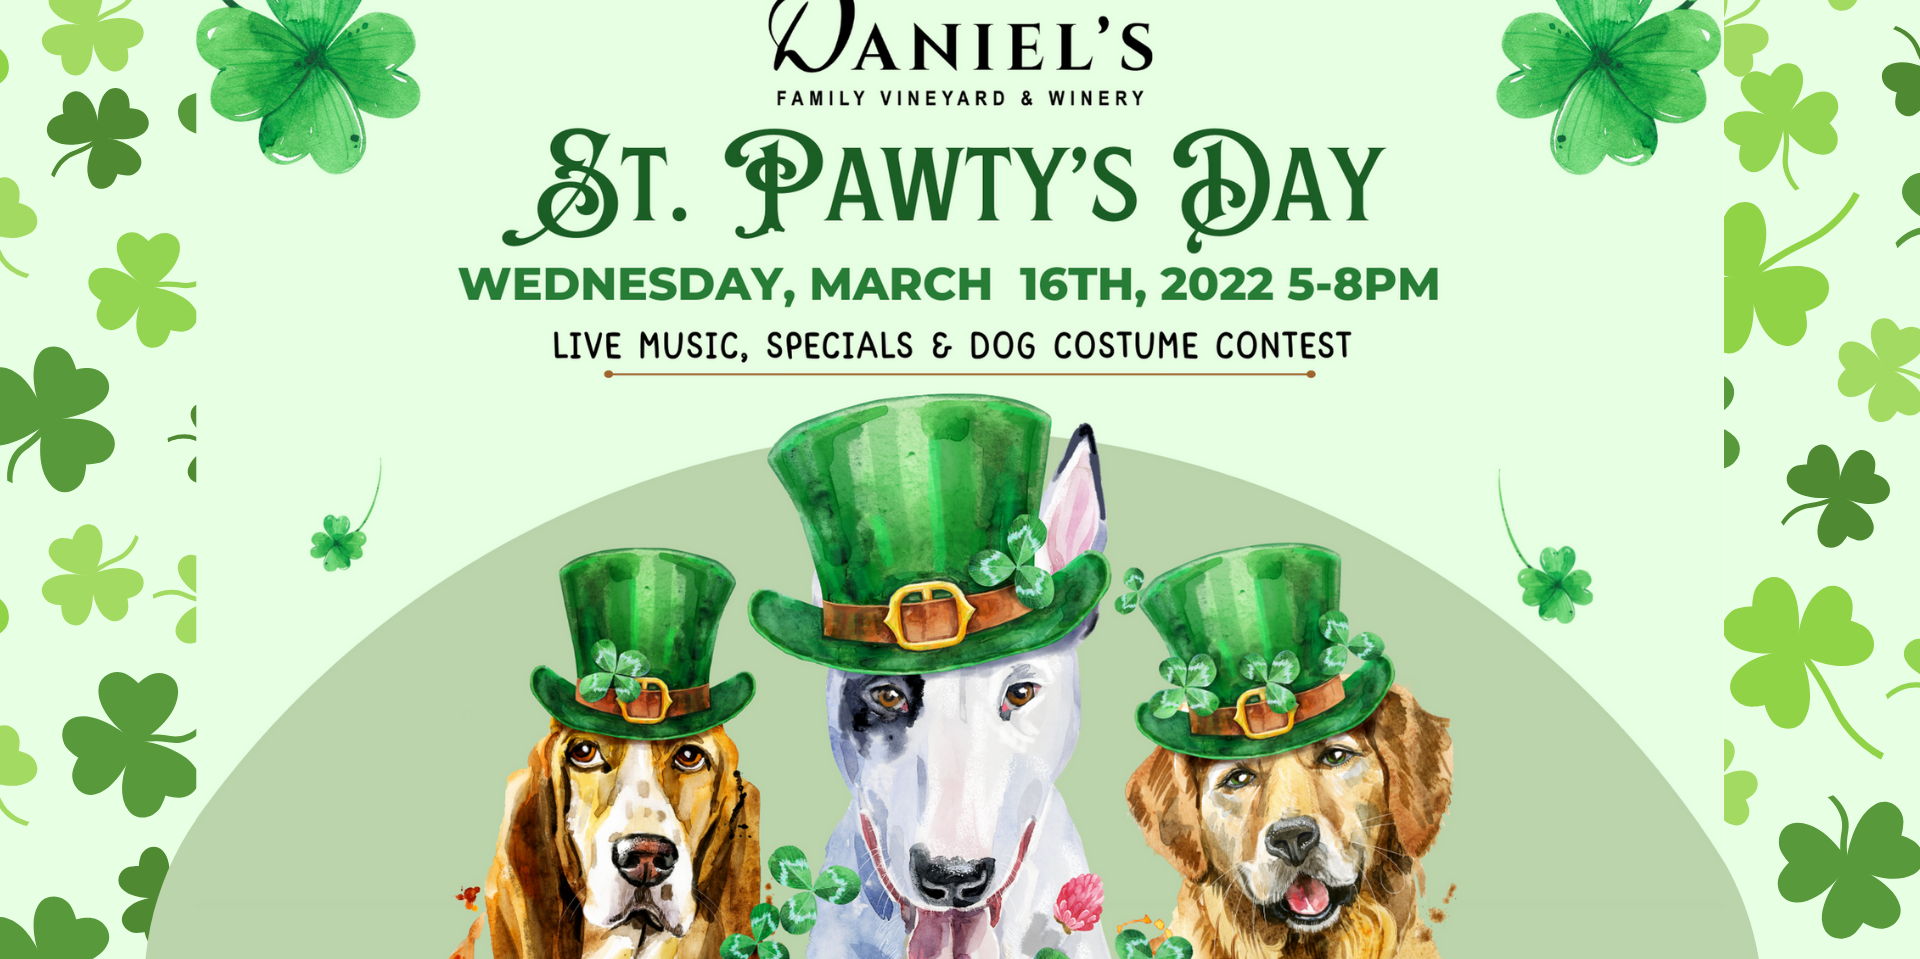 St. Pawty's Day at Daniel's Vineyard promotional image